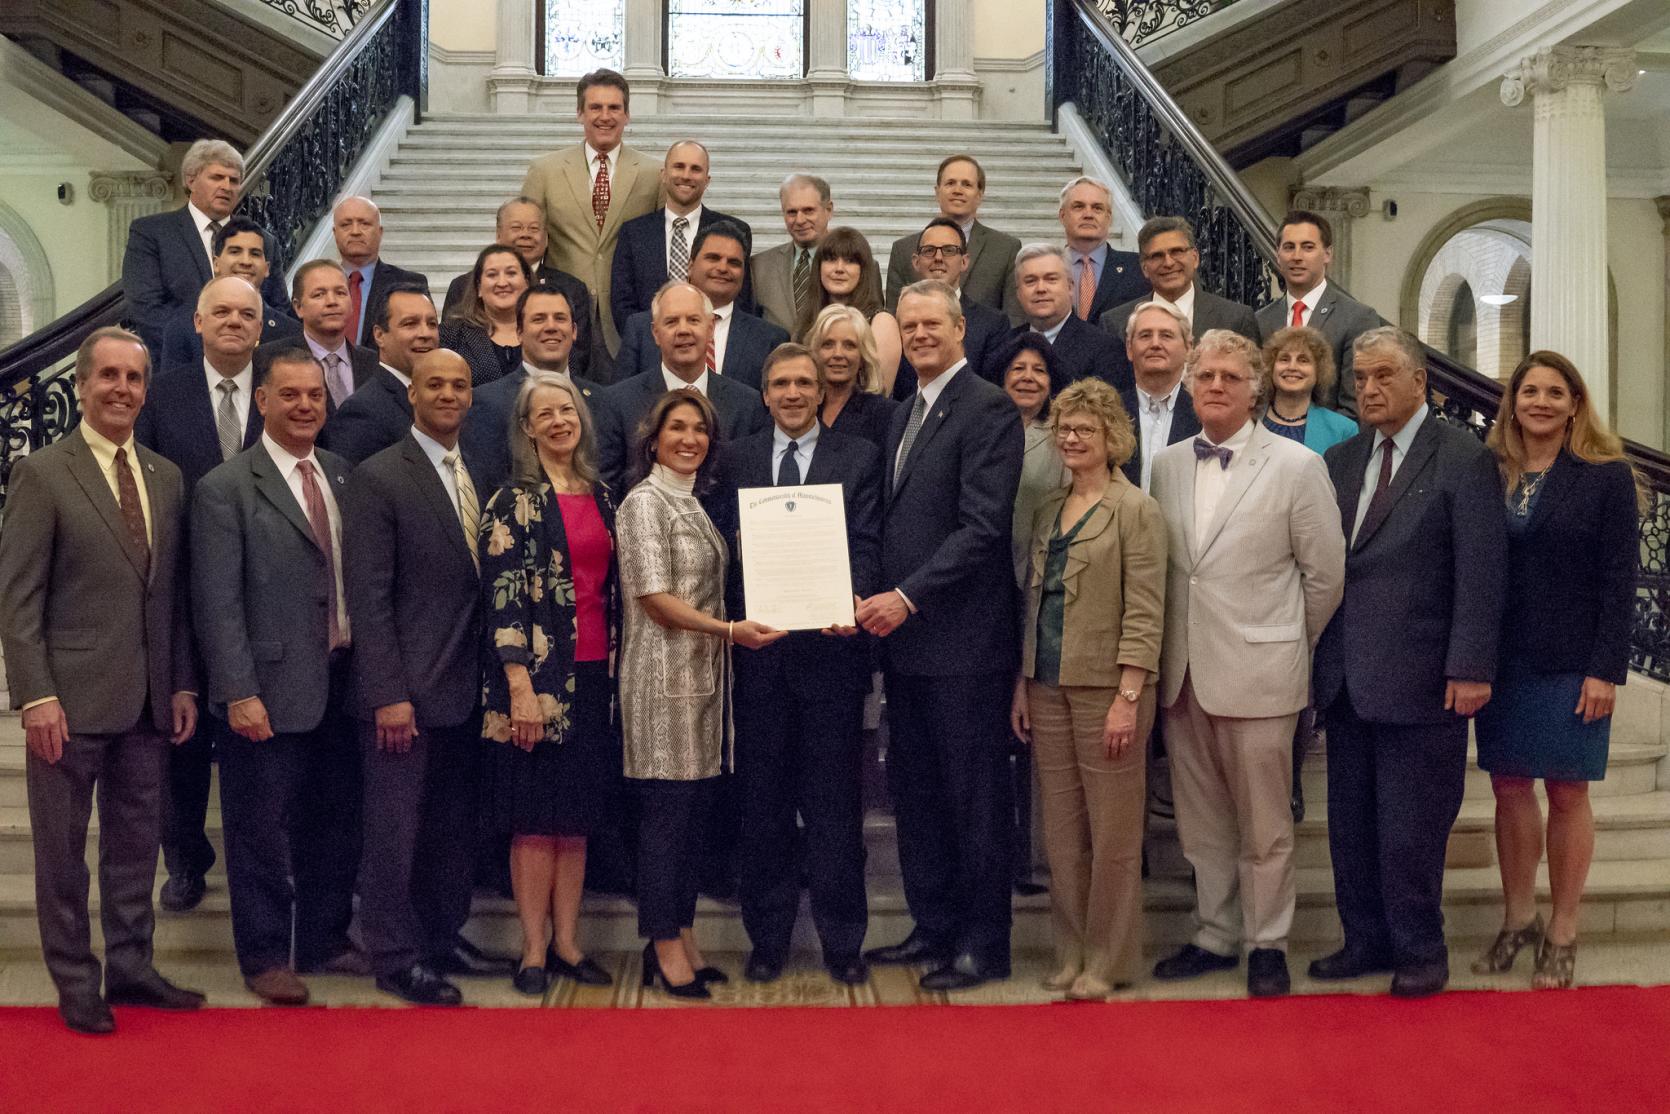 Governor Baker and Lt. Governor Polito declare May to be Municipal Month.